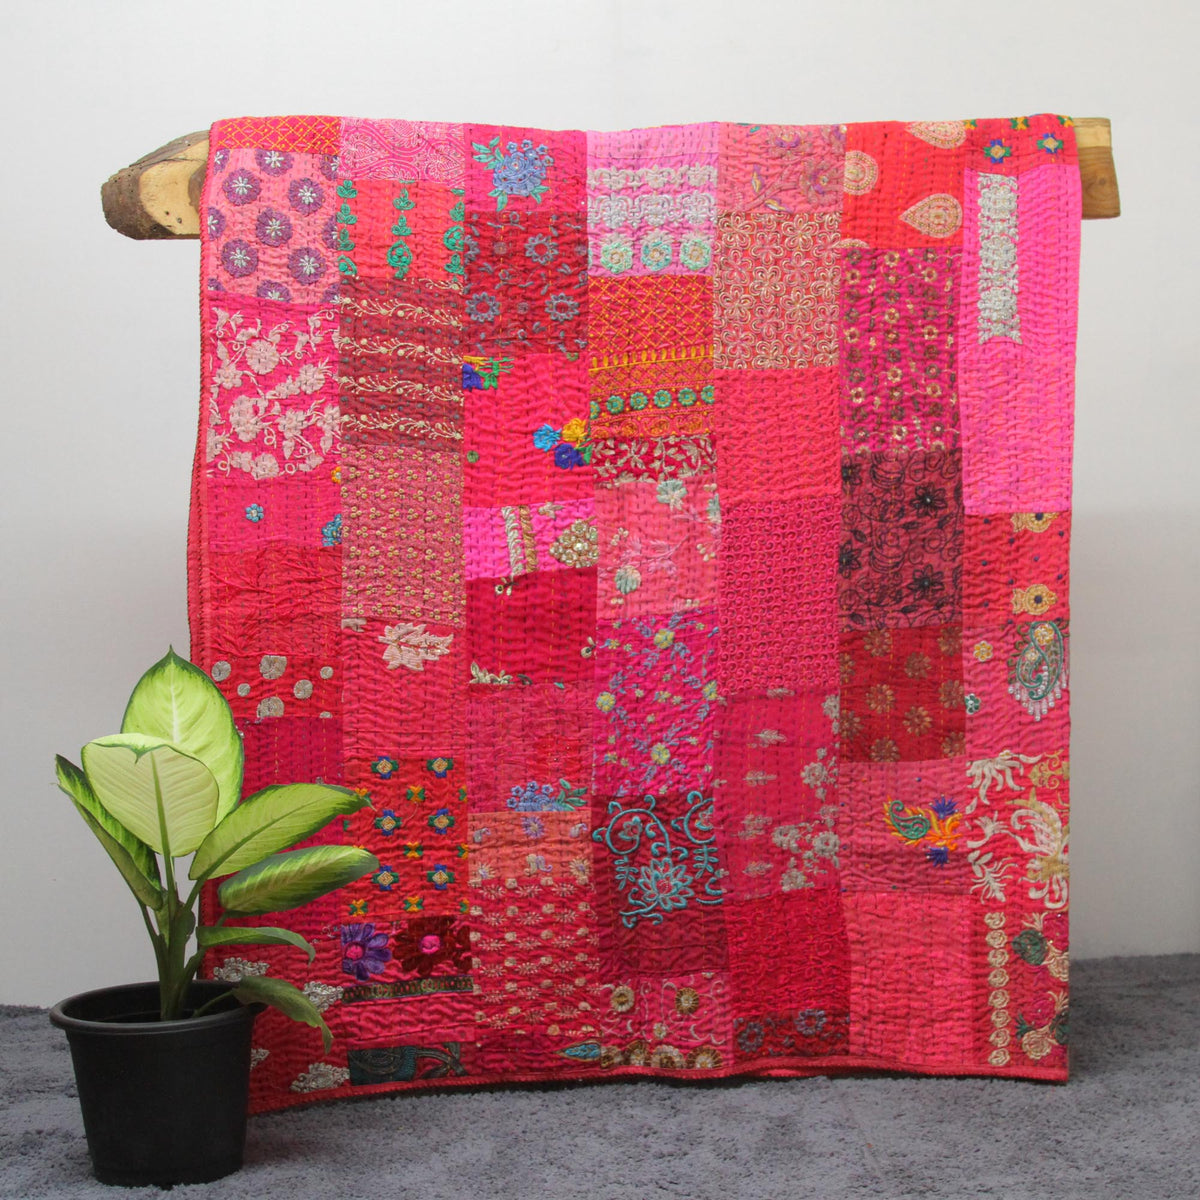 Pink Embroidered Assorted Patchwork Recycled Indian Sari Blanket,Handmade Kantha Quilt, Bedding Throw, Bedspread, Gift